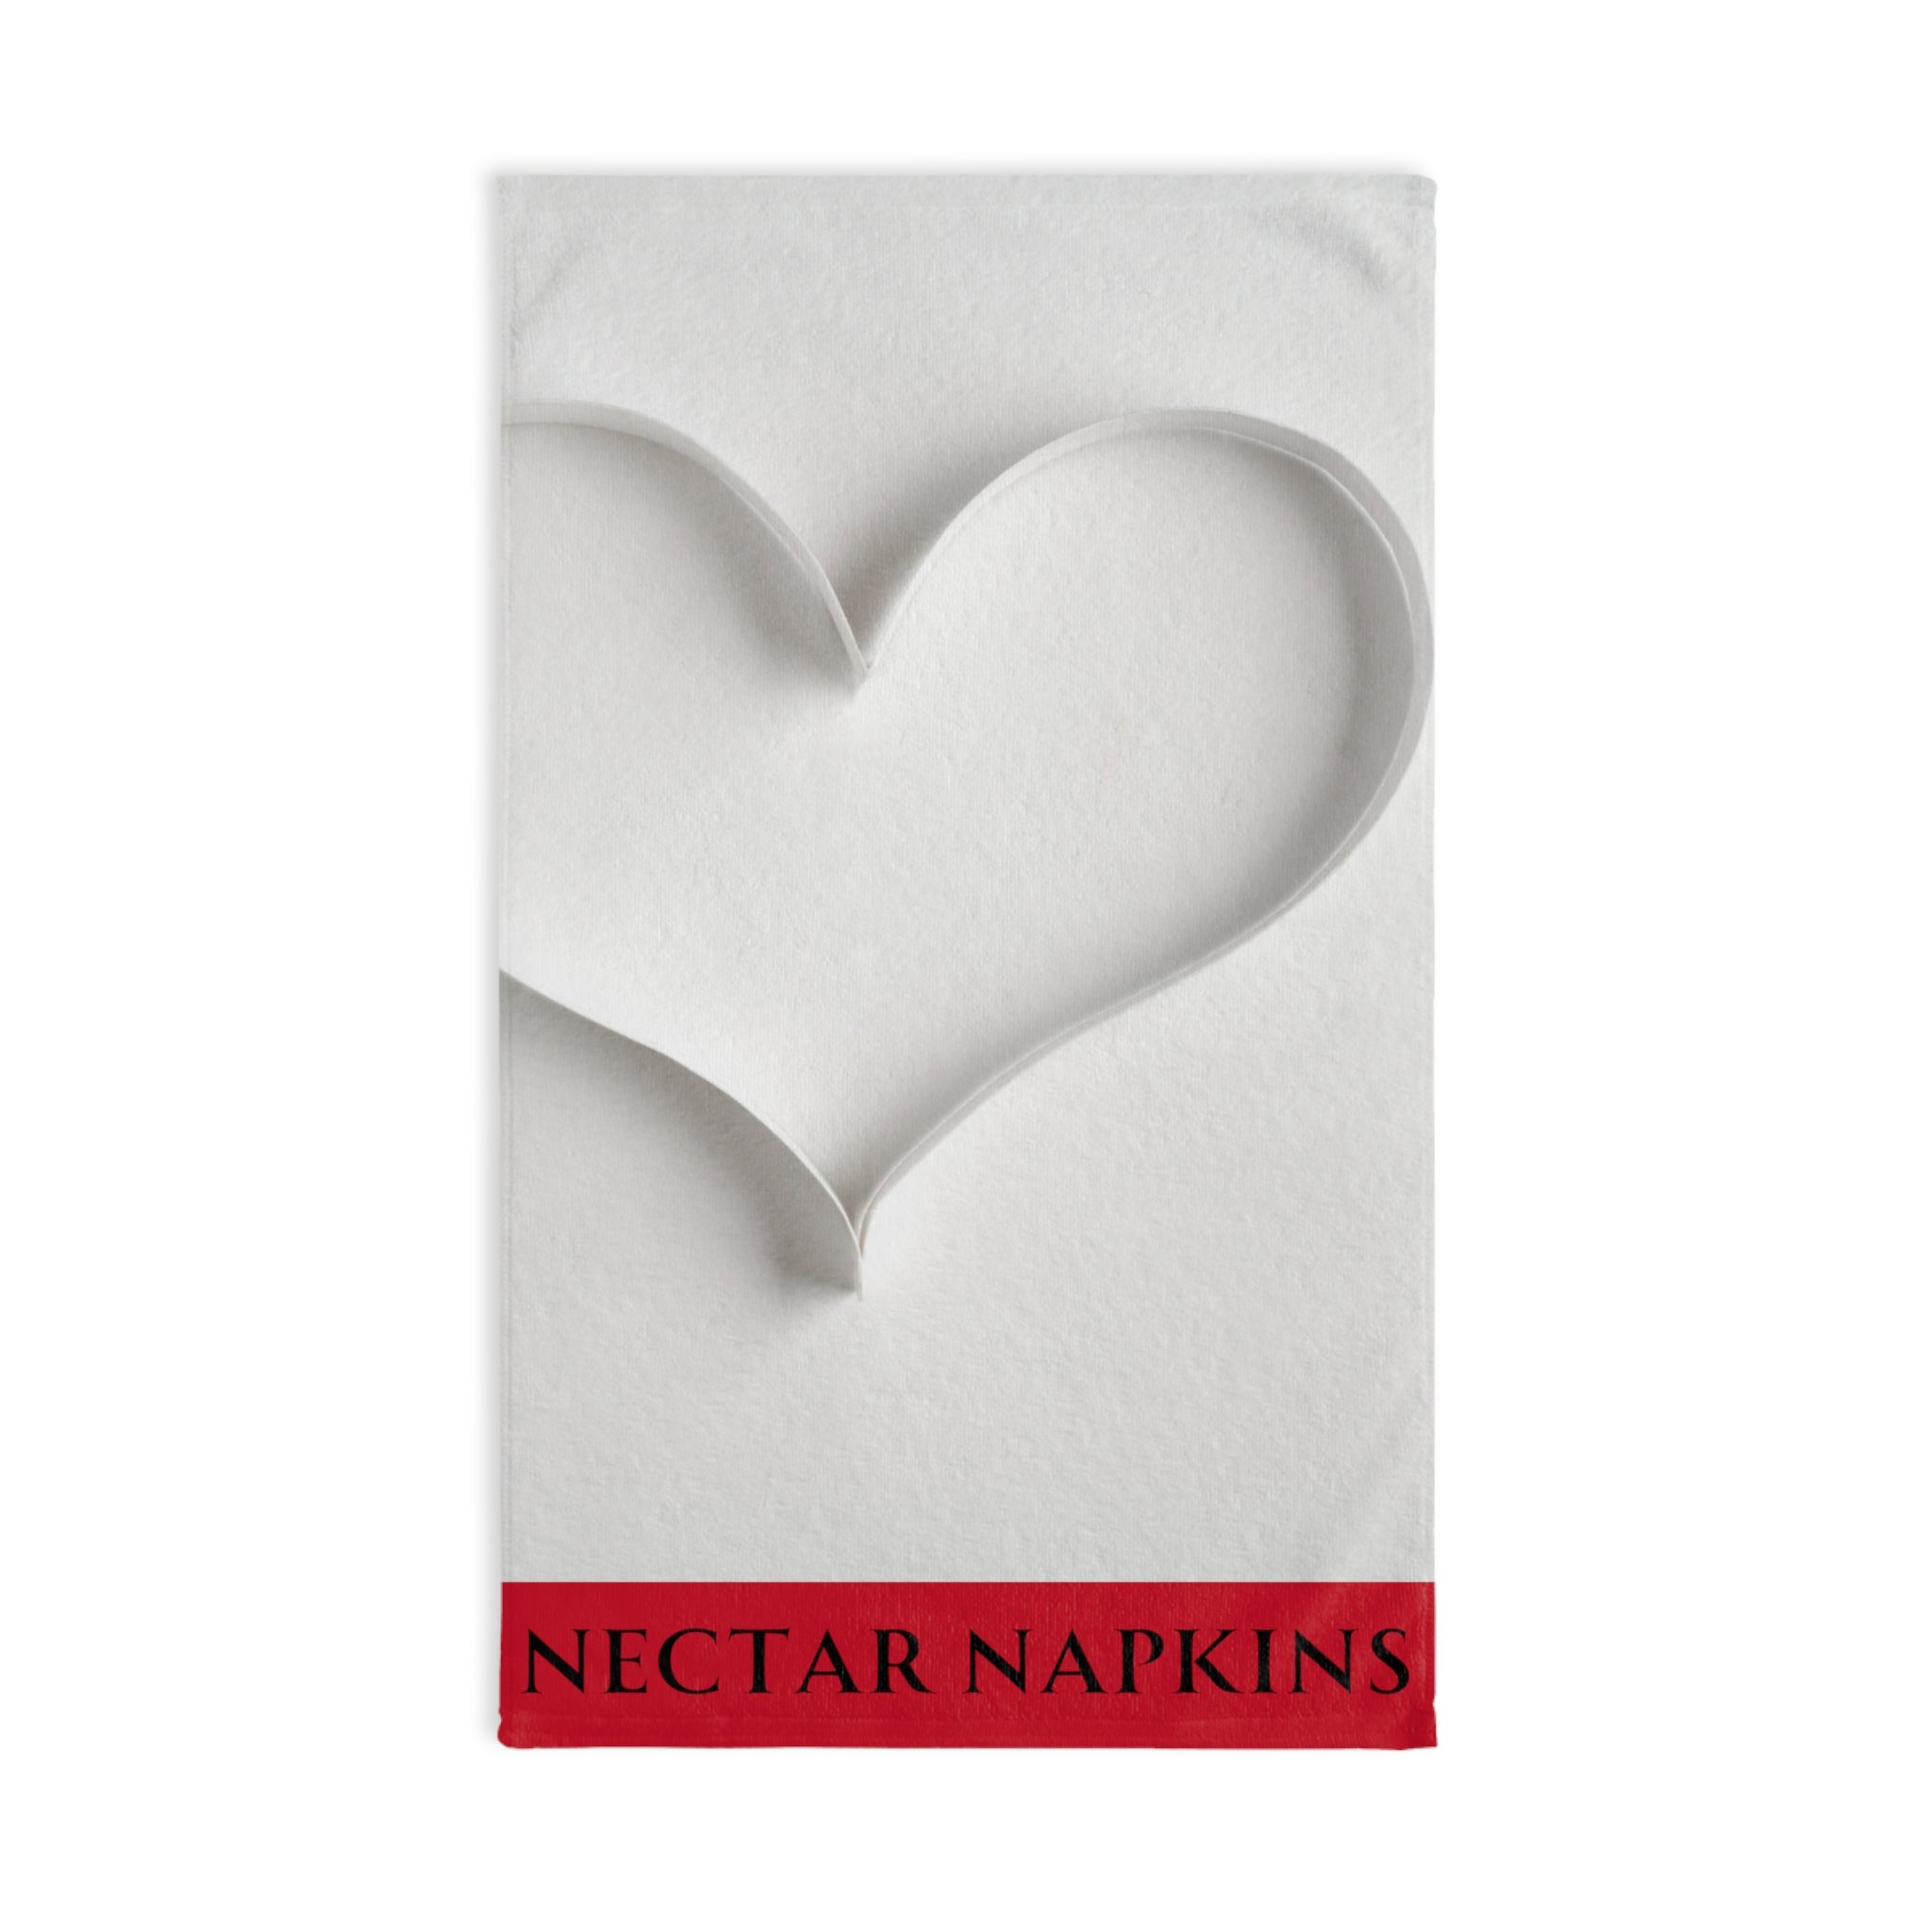 Paper Heart 3D Red | Sexy Gifts for Boyfriend, Funny Towel Romantic Gift for Wedding Couple Fiance First Year 2nd Anniversary Valentines, Party Gag Gifts, Joke Humor Cloth for Husband Men BF NECTAR NAPKINS